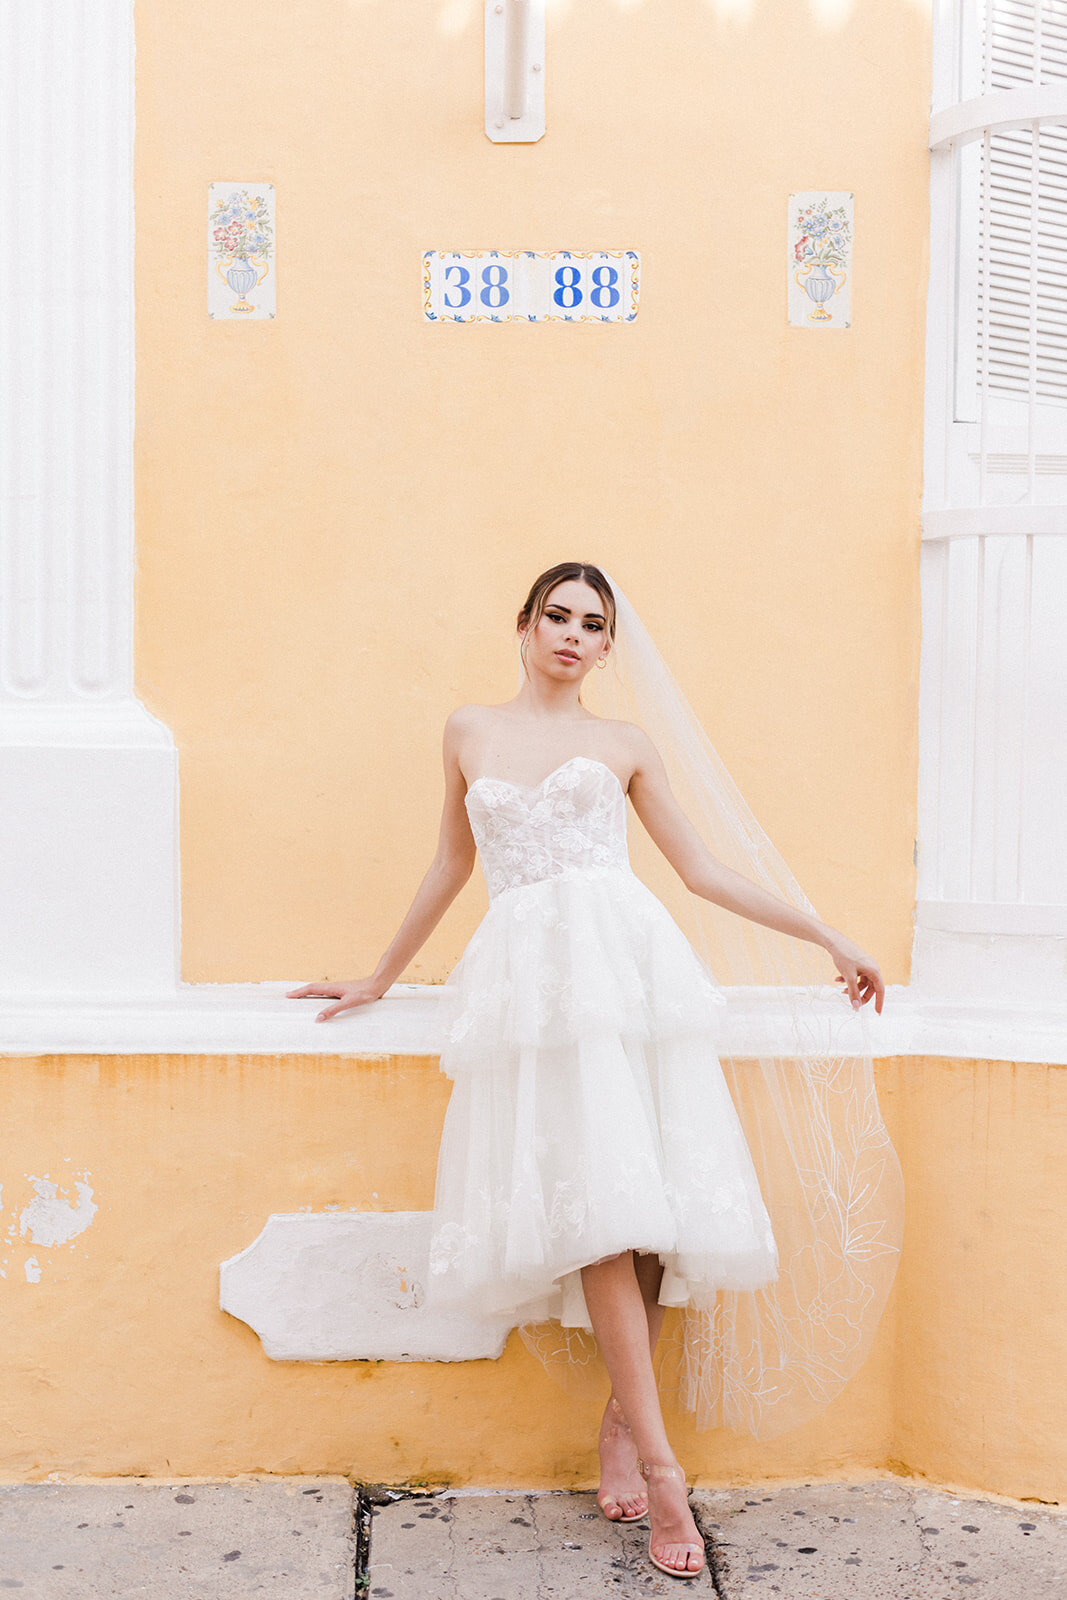 Watters Wedaways Sofitel Cartagena Colombia-Valorie Darling Photography-DF1A2834